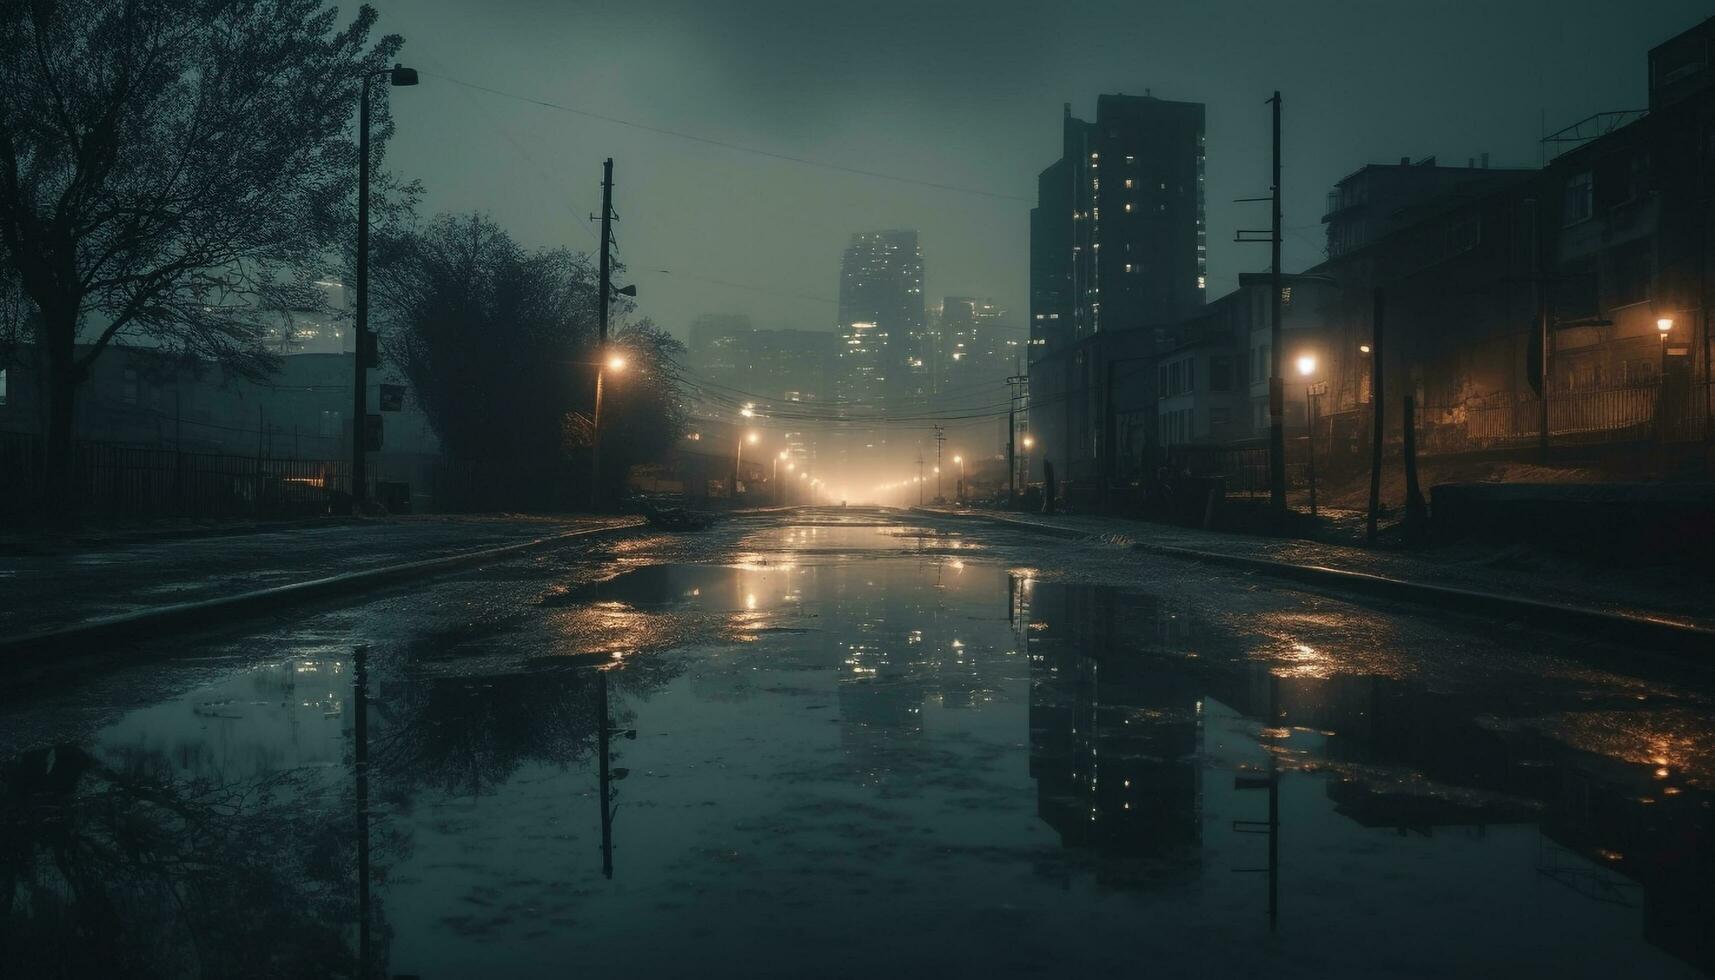 The city nightlife illuminates the dark, wet streets outdoors generated by AI photo